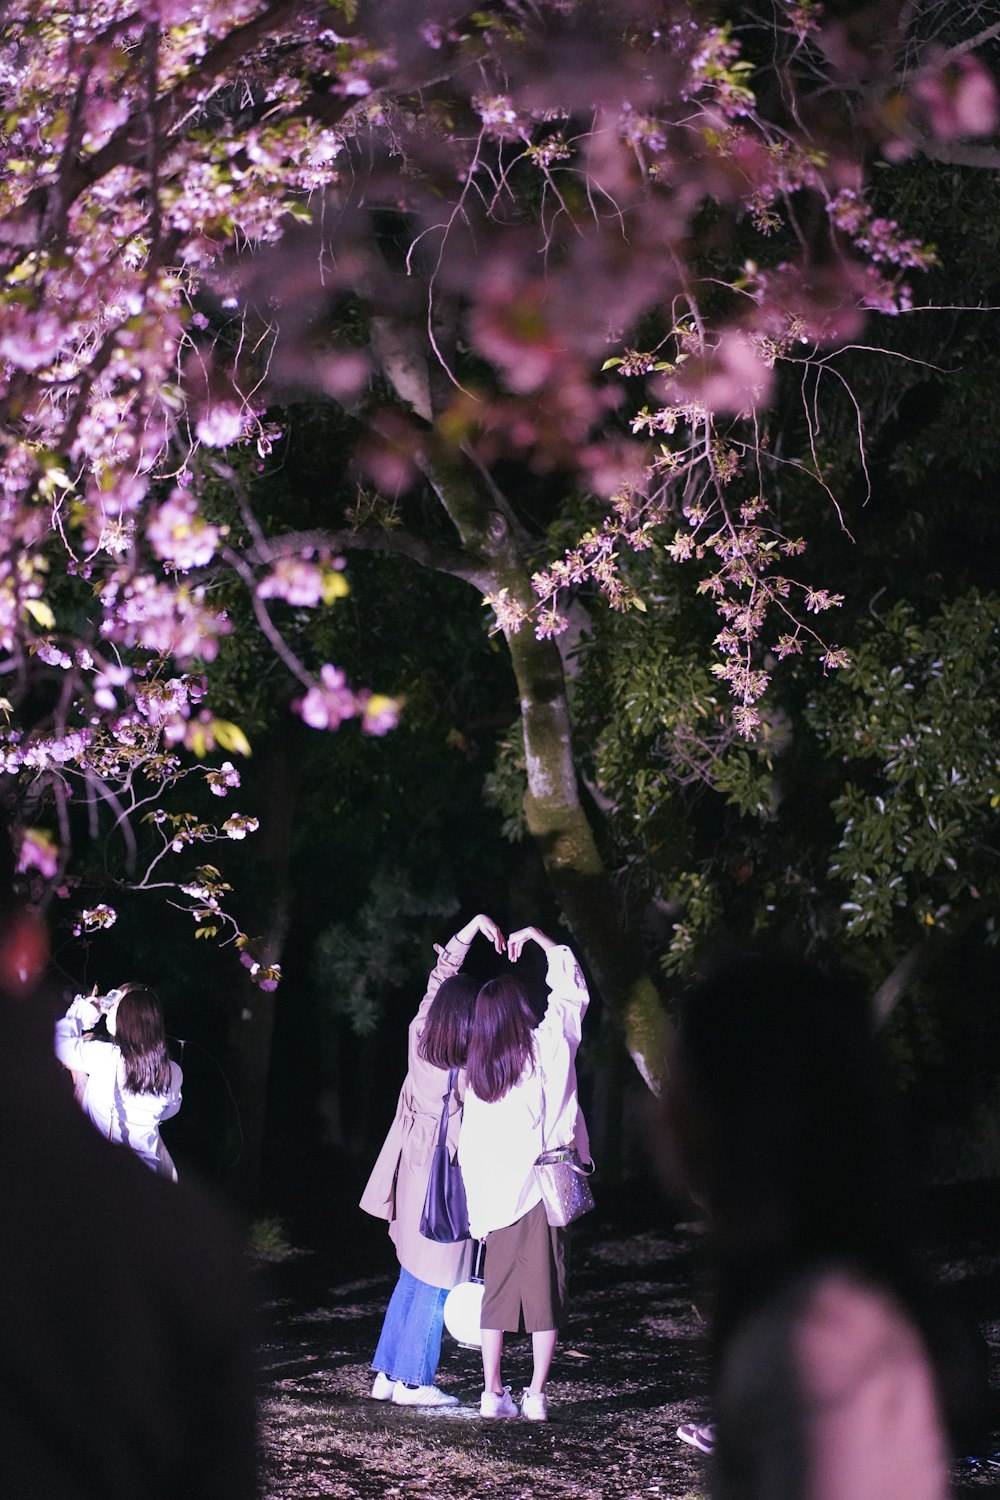 a group of people standing under a tree filled with pink flowers